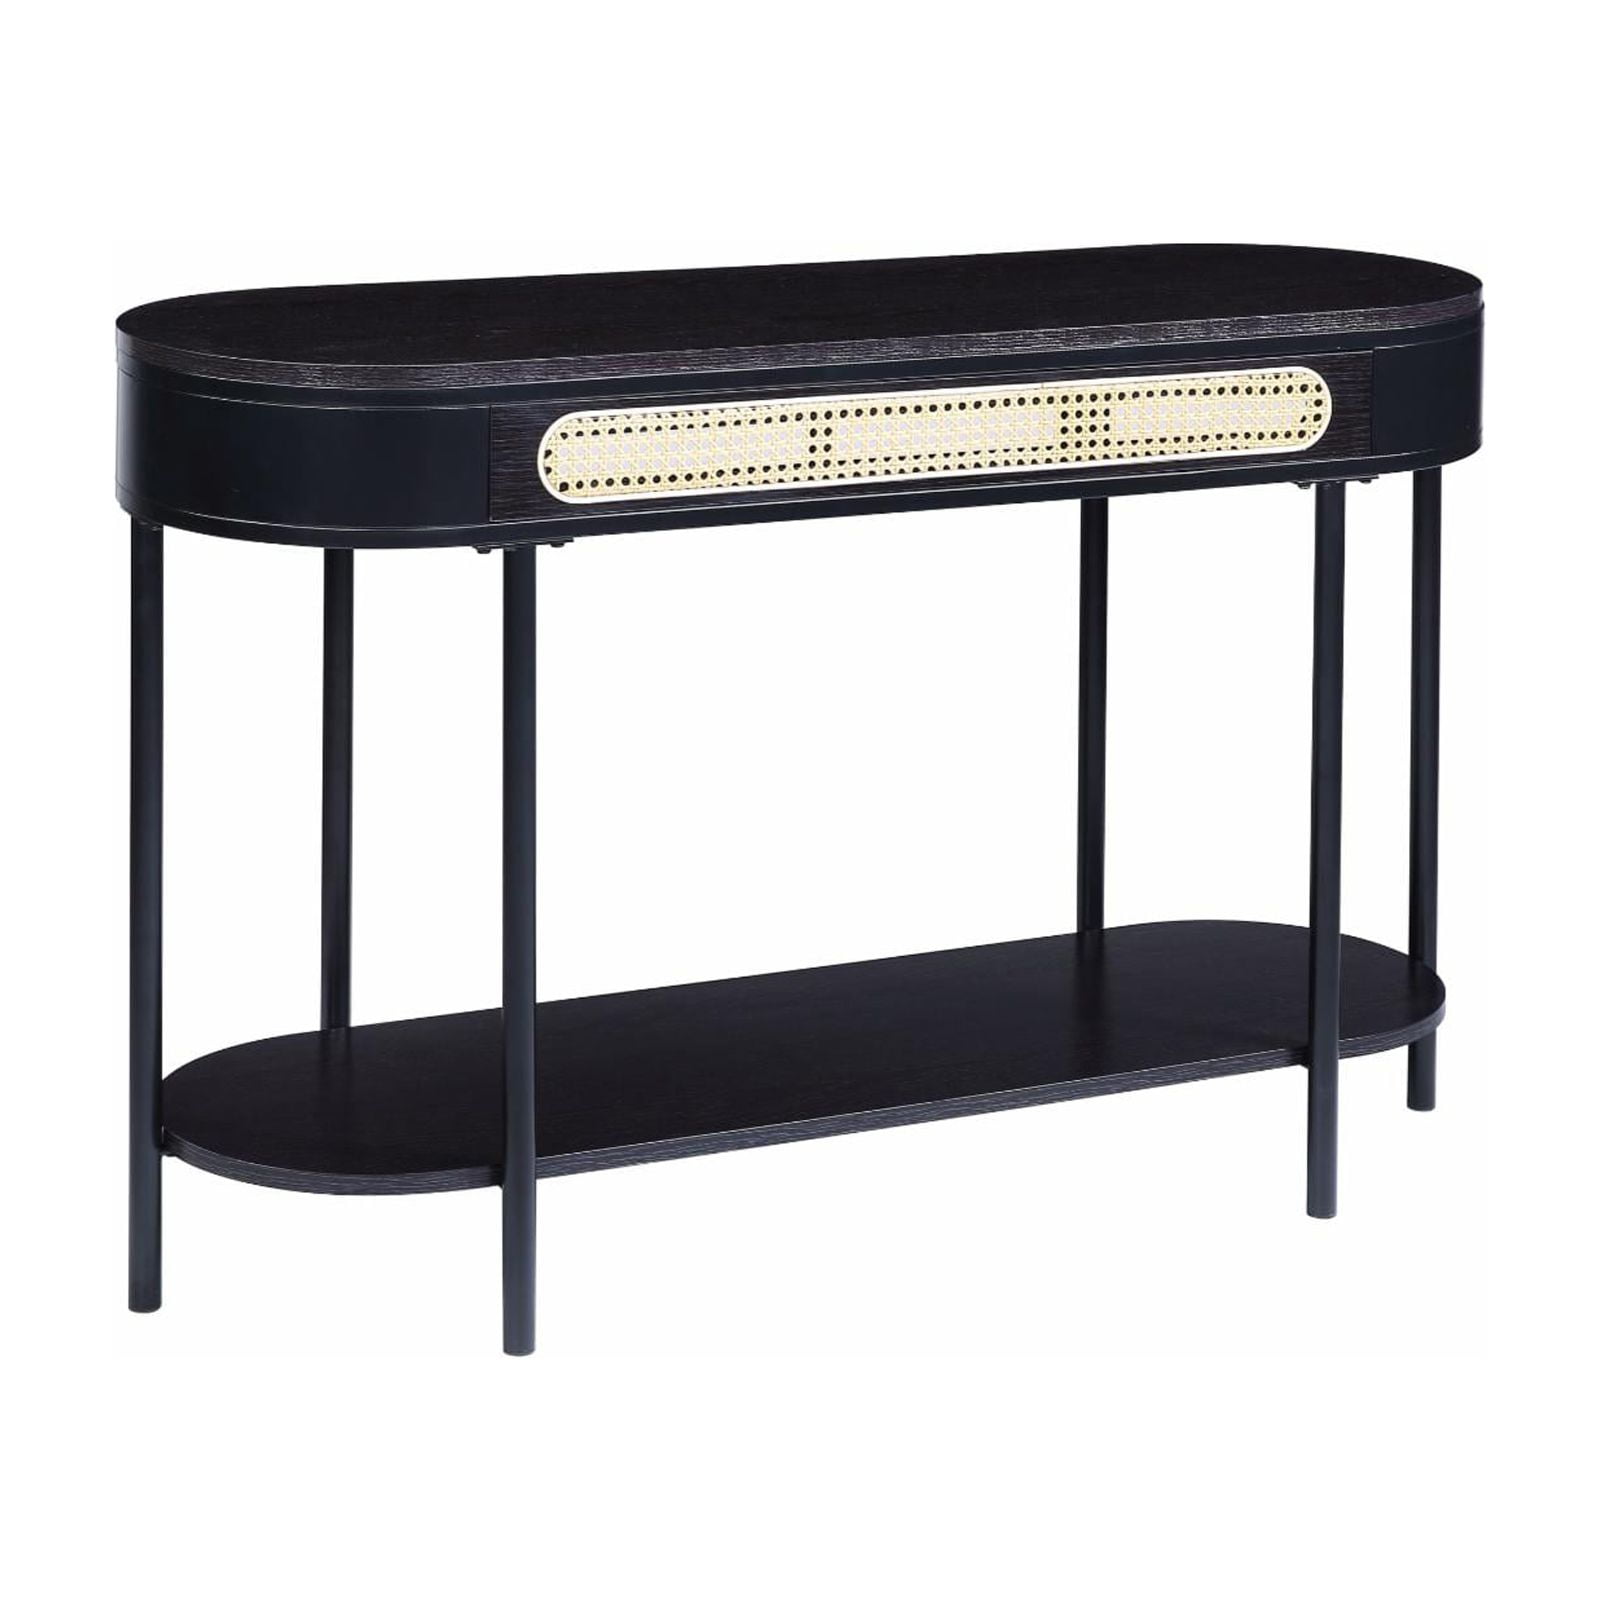 Picture of Acme Furniture LV01078 47 x 16 x 30 in. Colson Sofa Table, Black